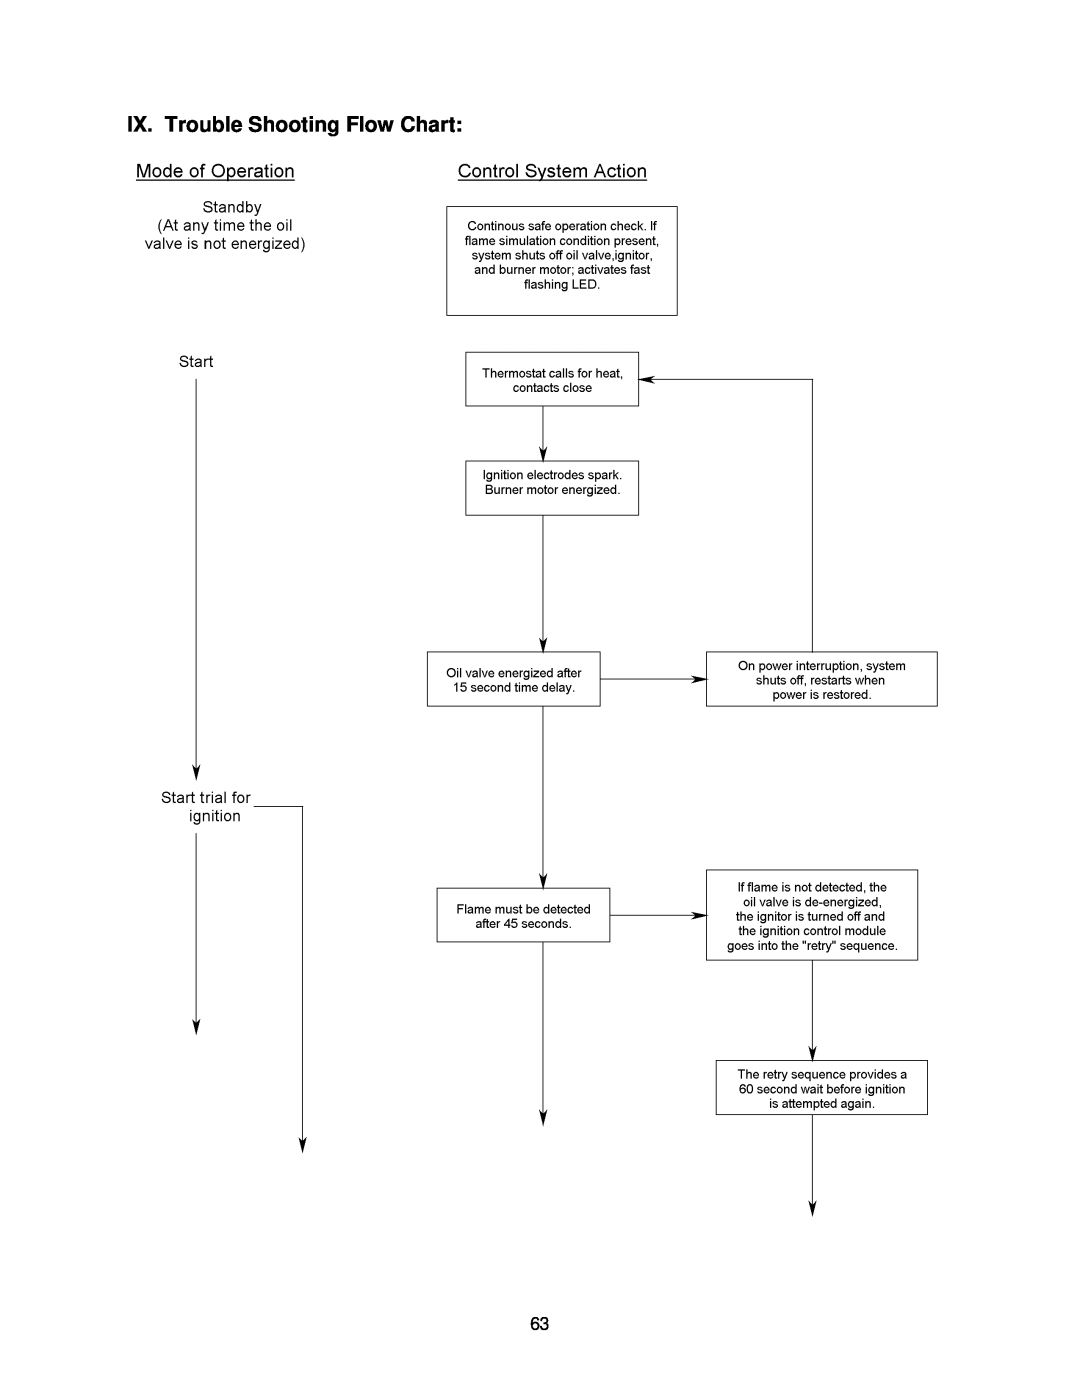 Thermo Products OHFA199DV5B, OHFA199DV5R operation manual IX. Trouble Shooting Flow Chart 